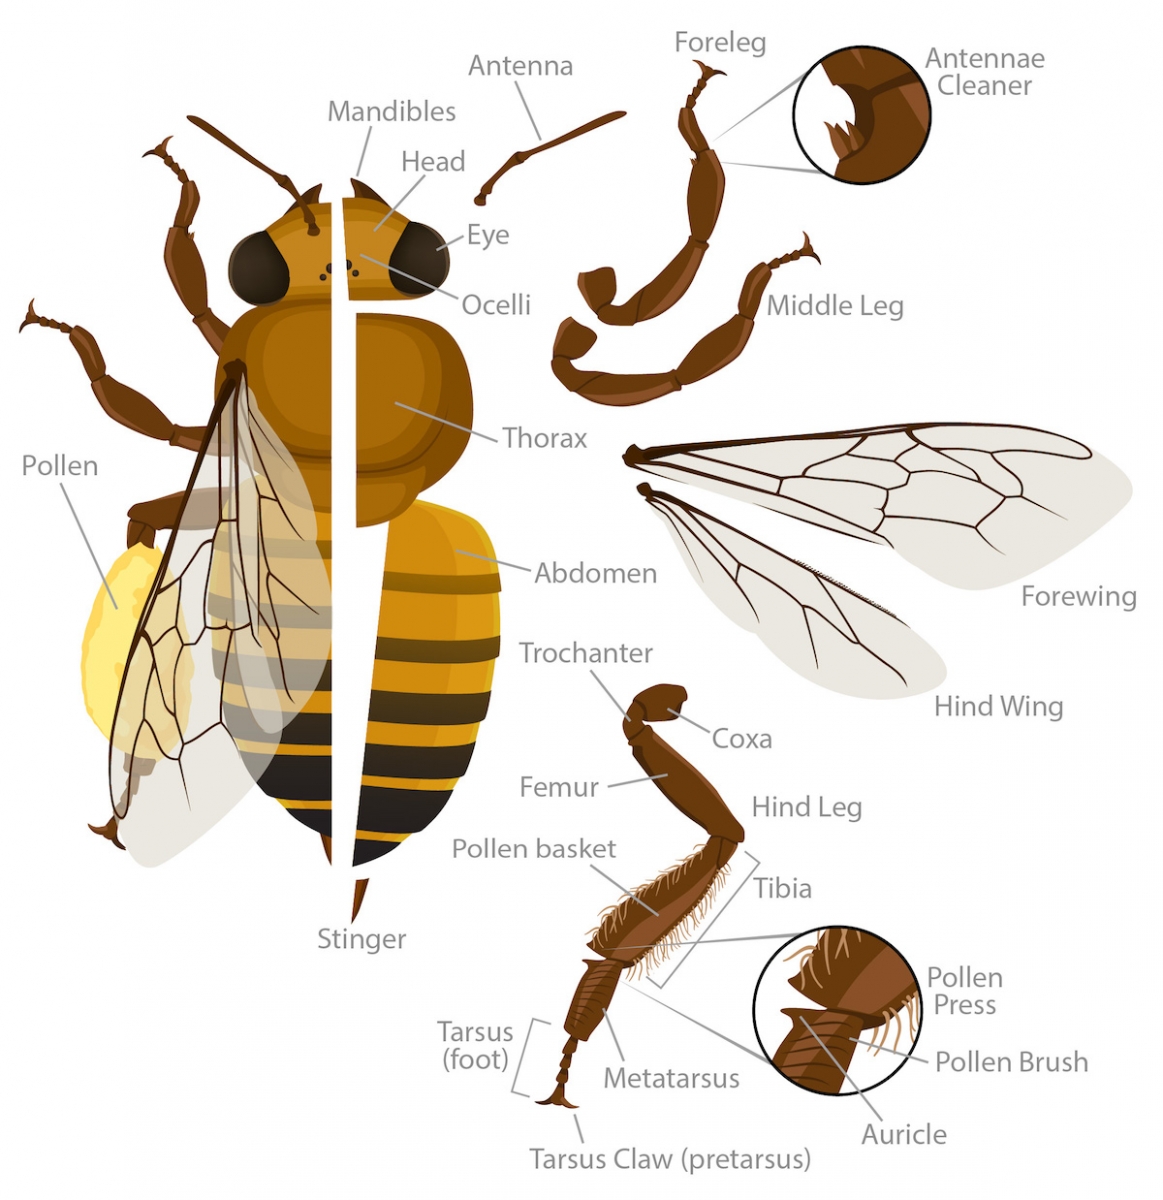 How many body sections does a honey bee have?